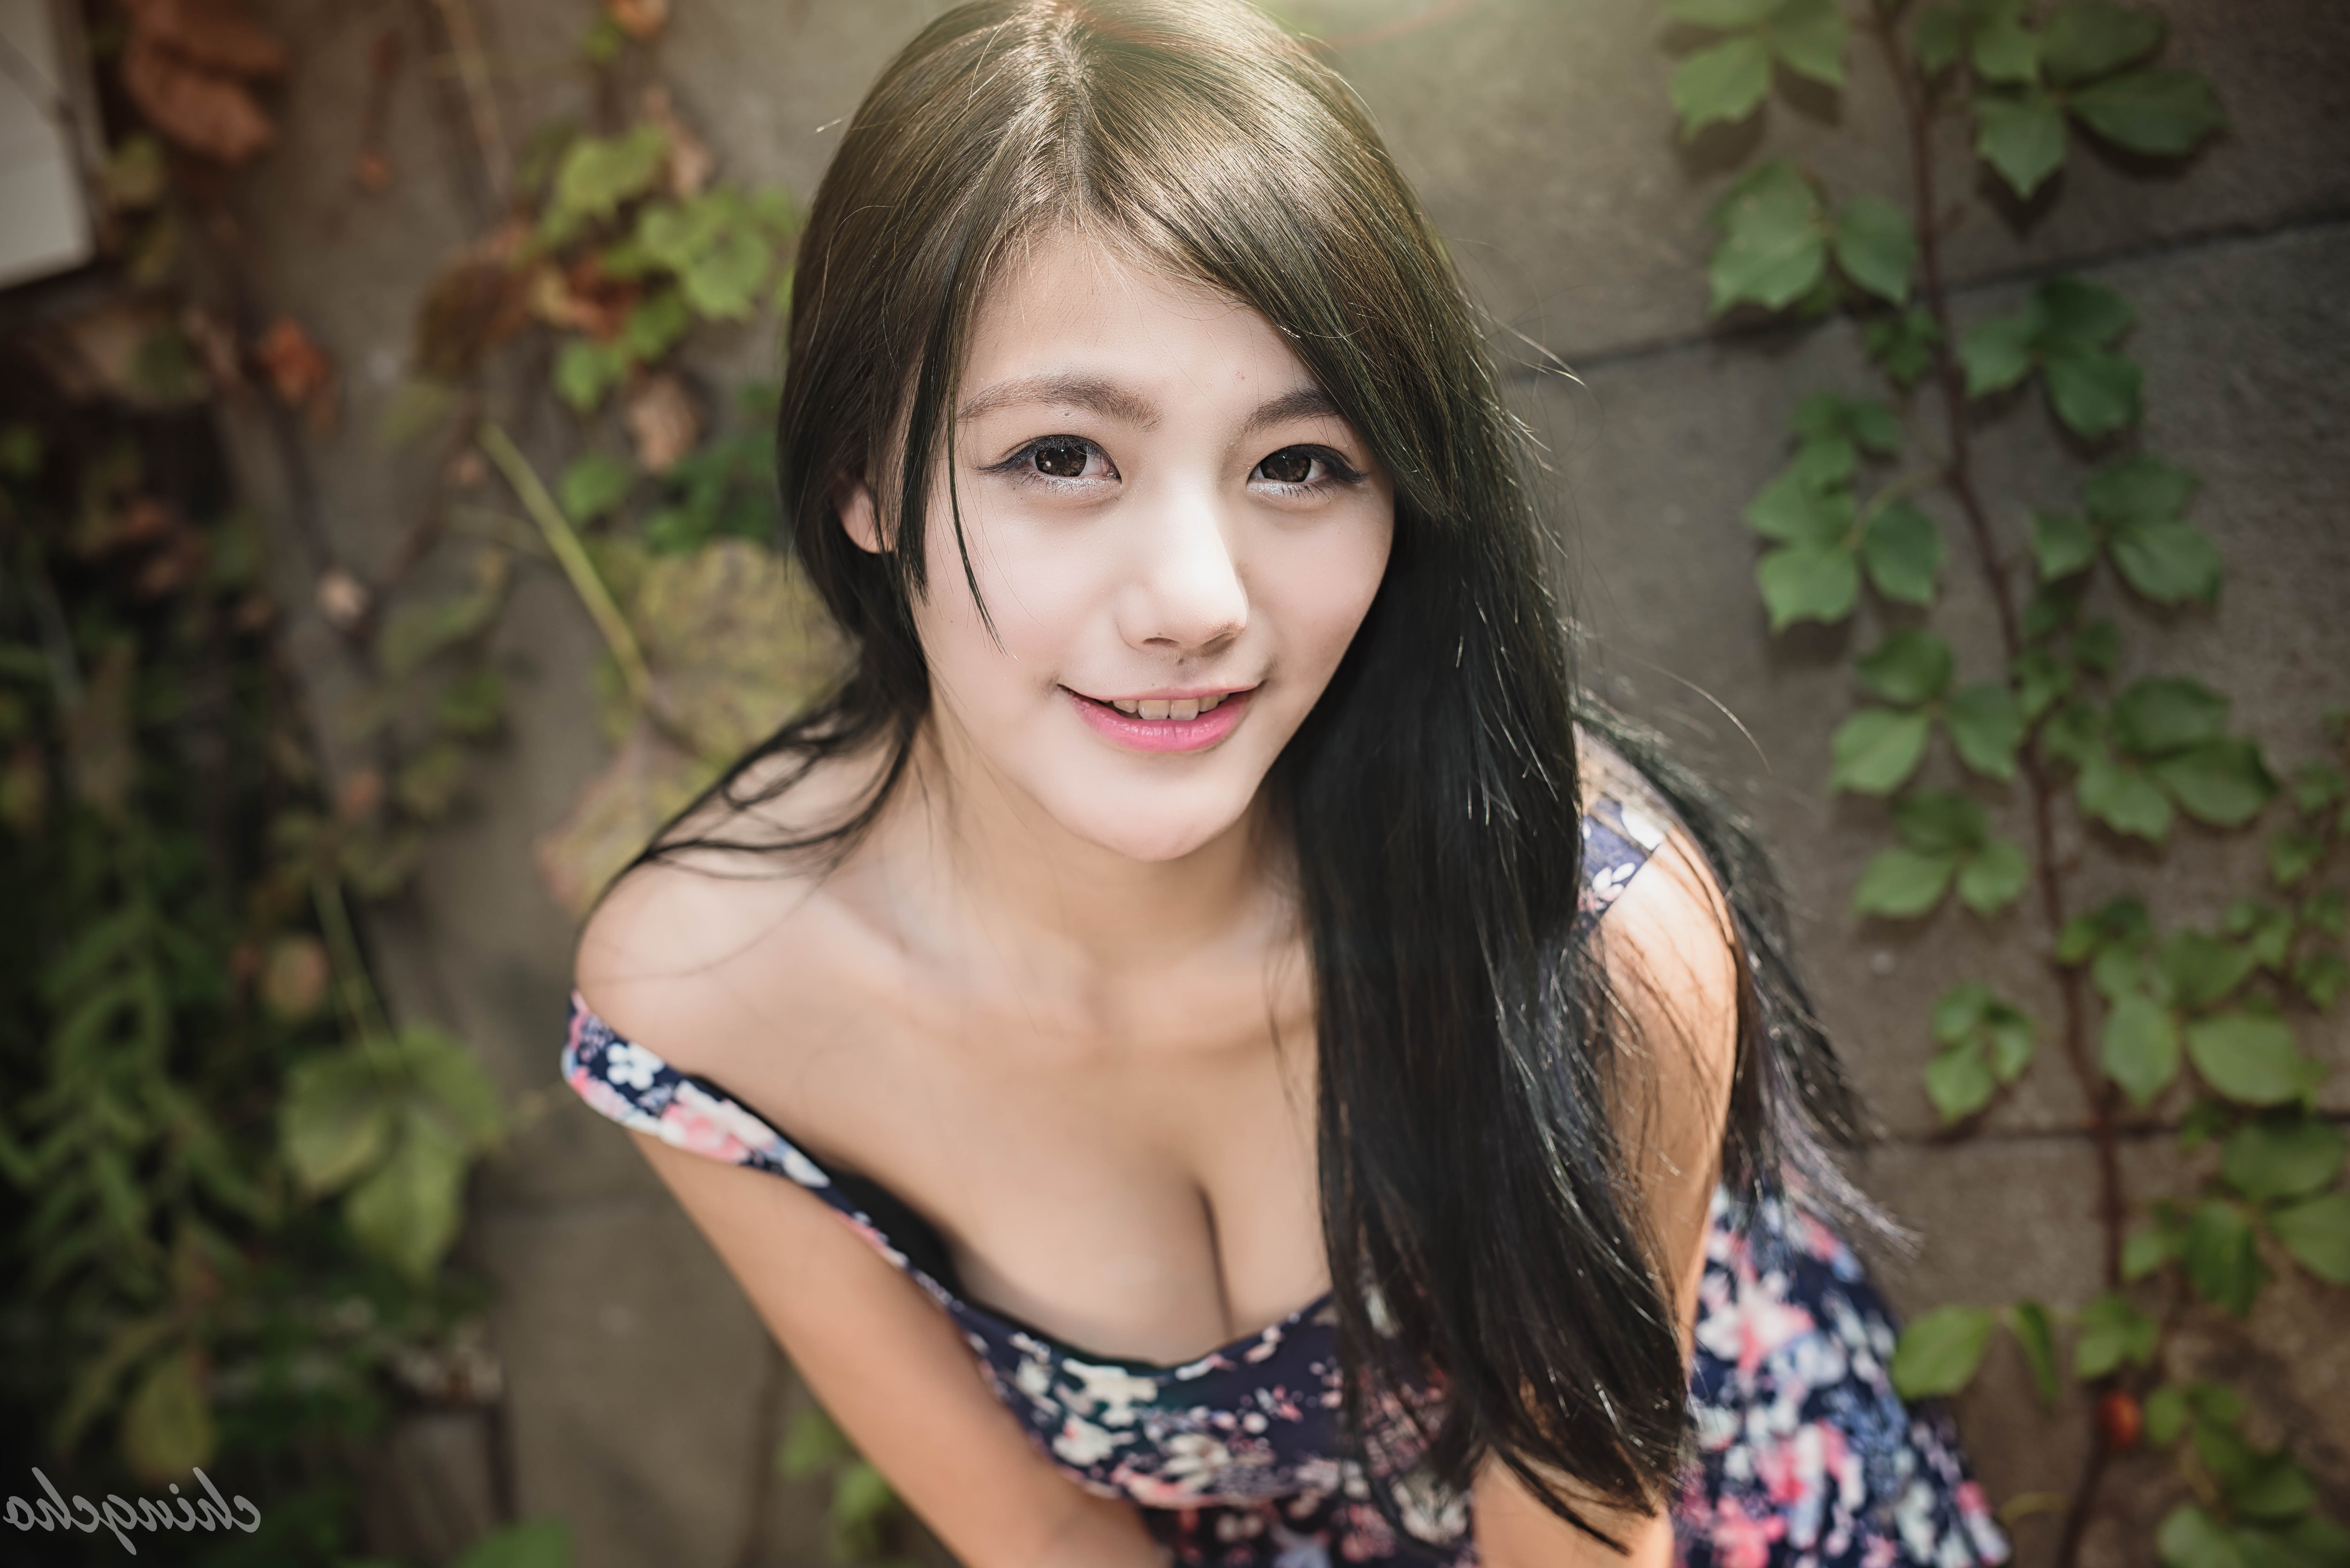 Chinese Girl Wallpaper for Android - APK Download